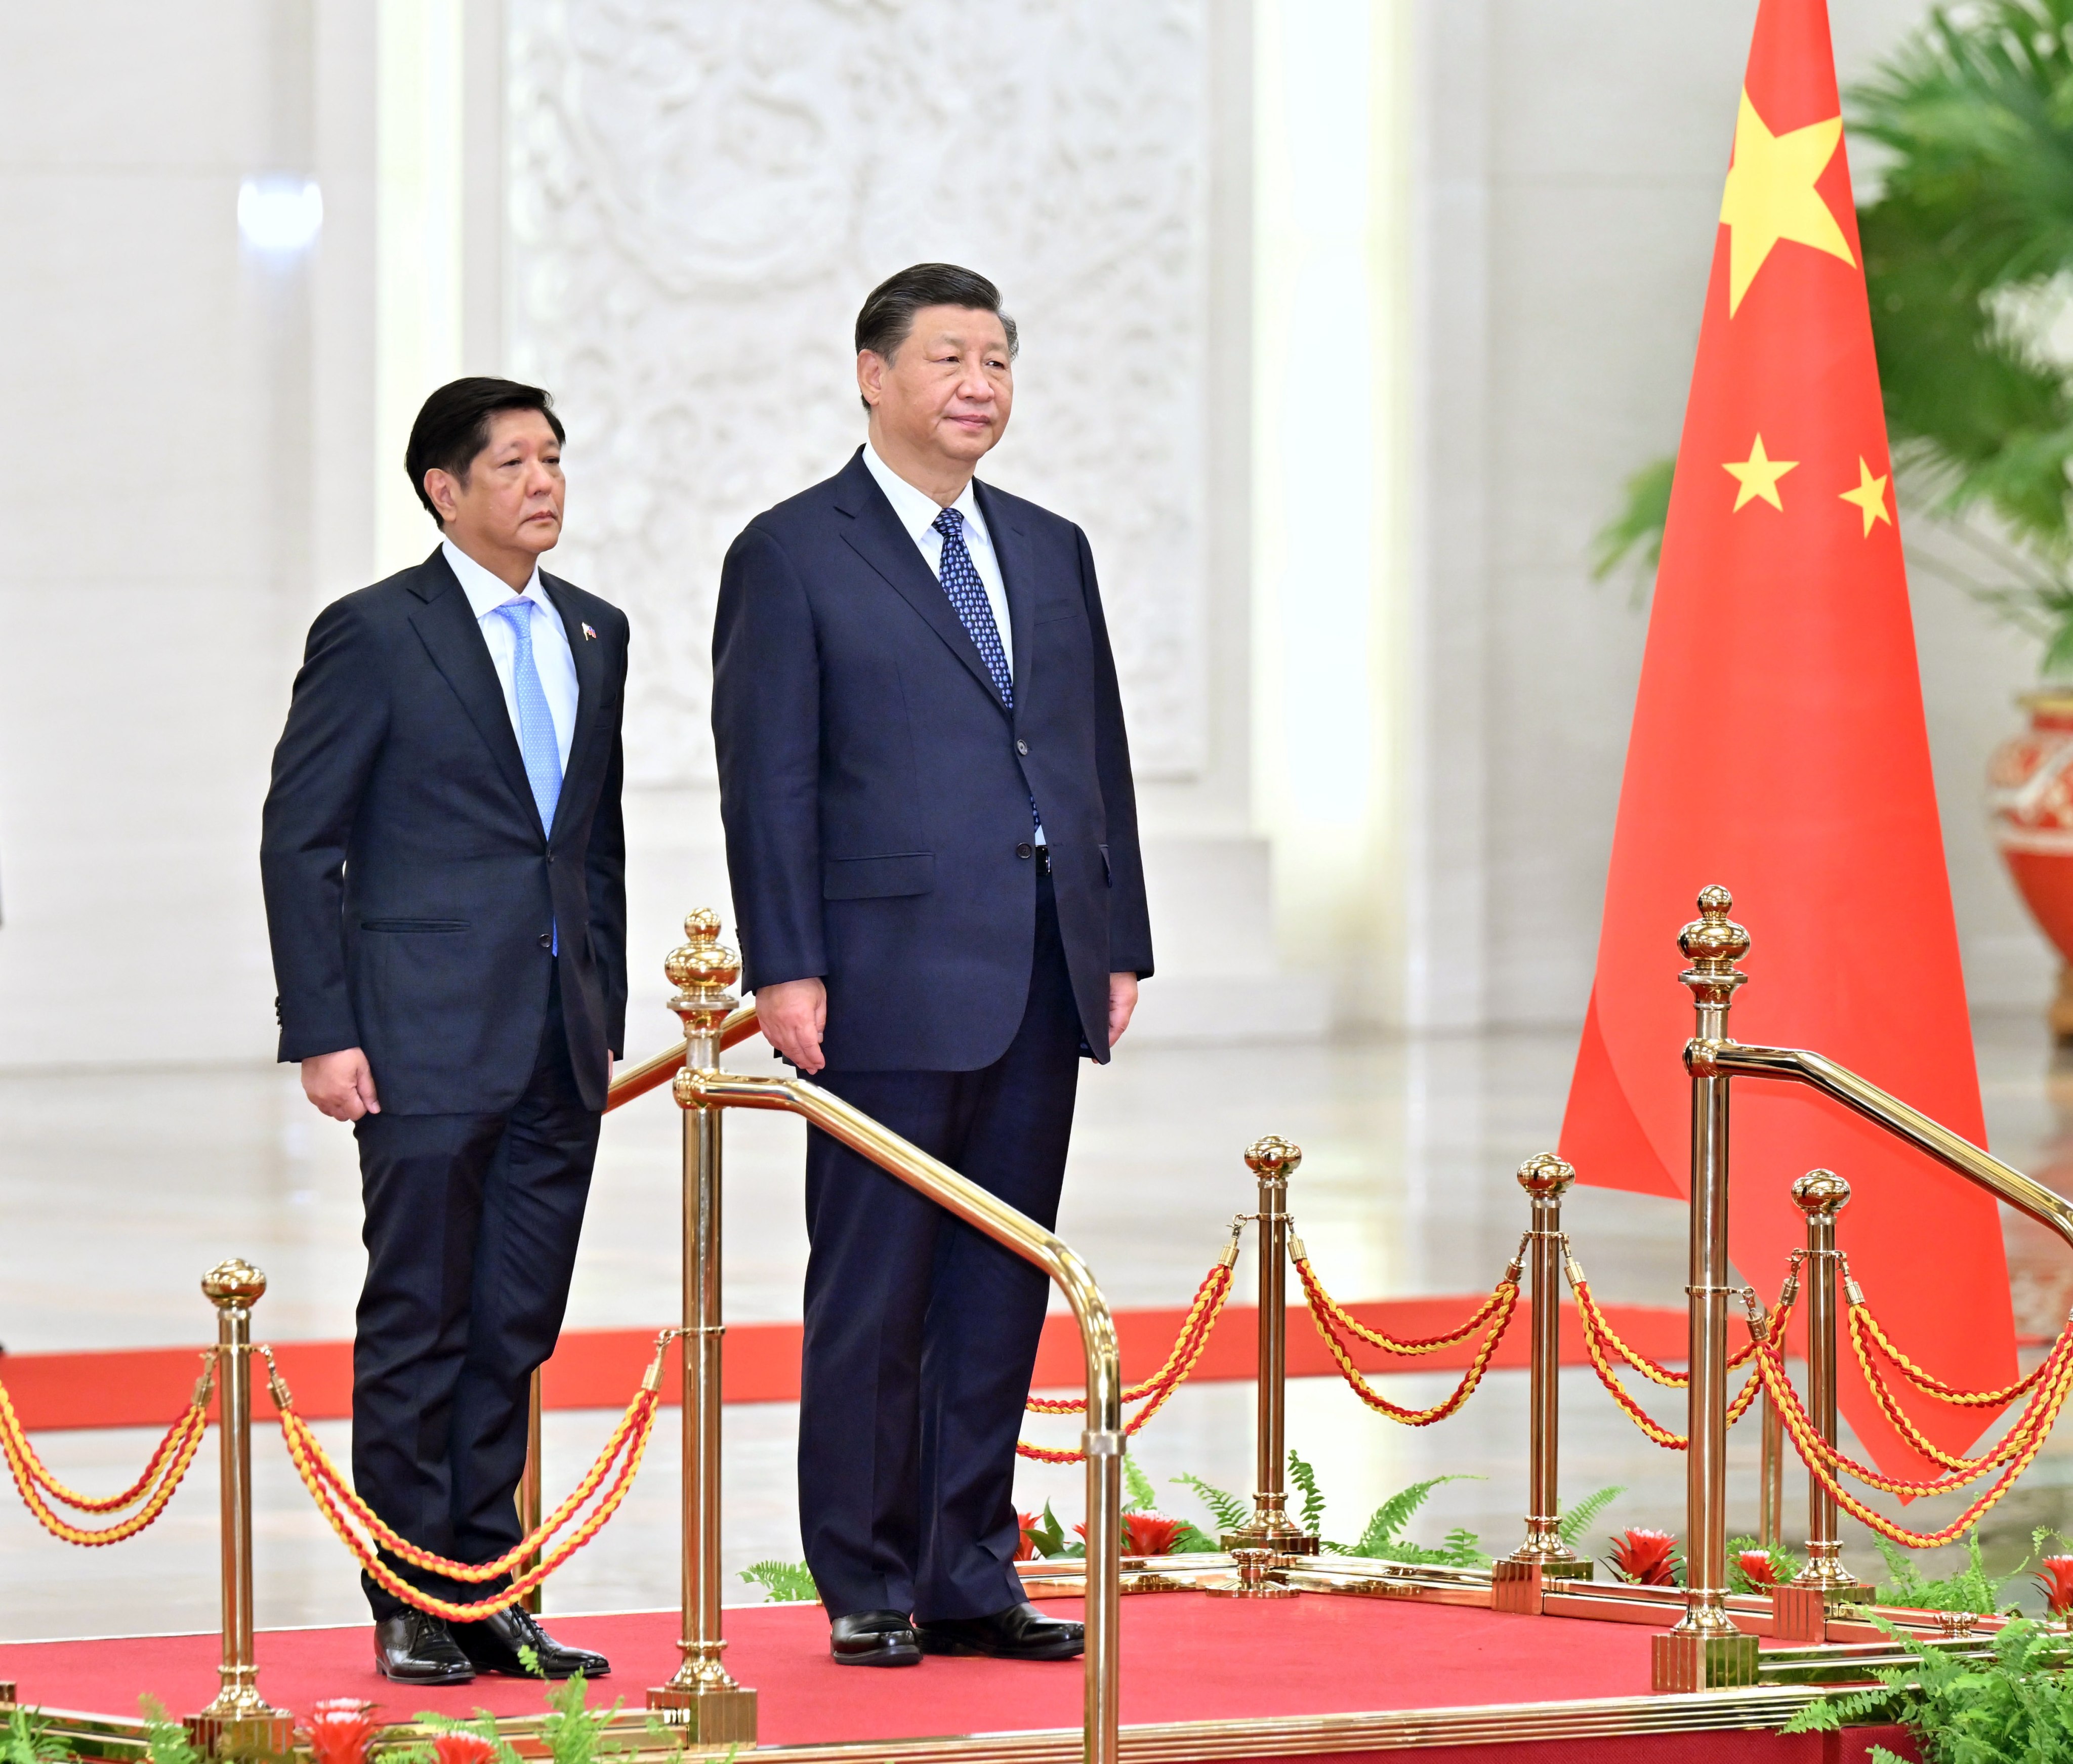 During a three-day visit to Beijing this week, Philippine president Ferdinand Marcos Jnr (left) signed 14 deals with President Xi Jinping spanning infrastructure investment to durian imports. Photo: EPA-EFE